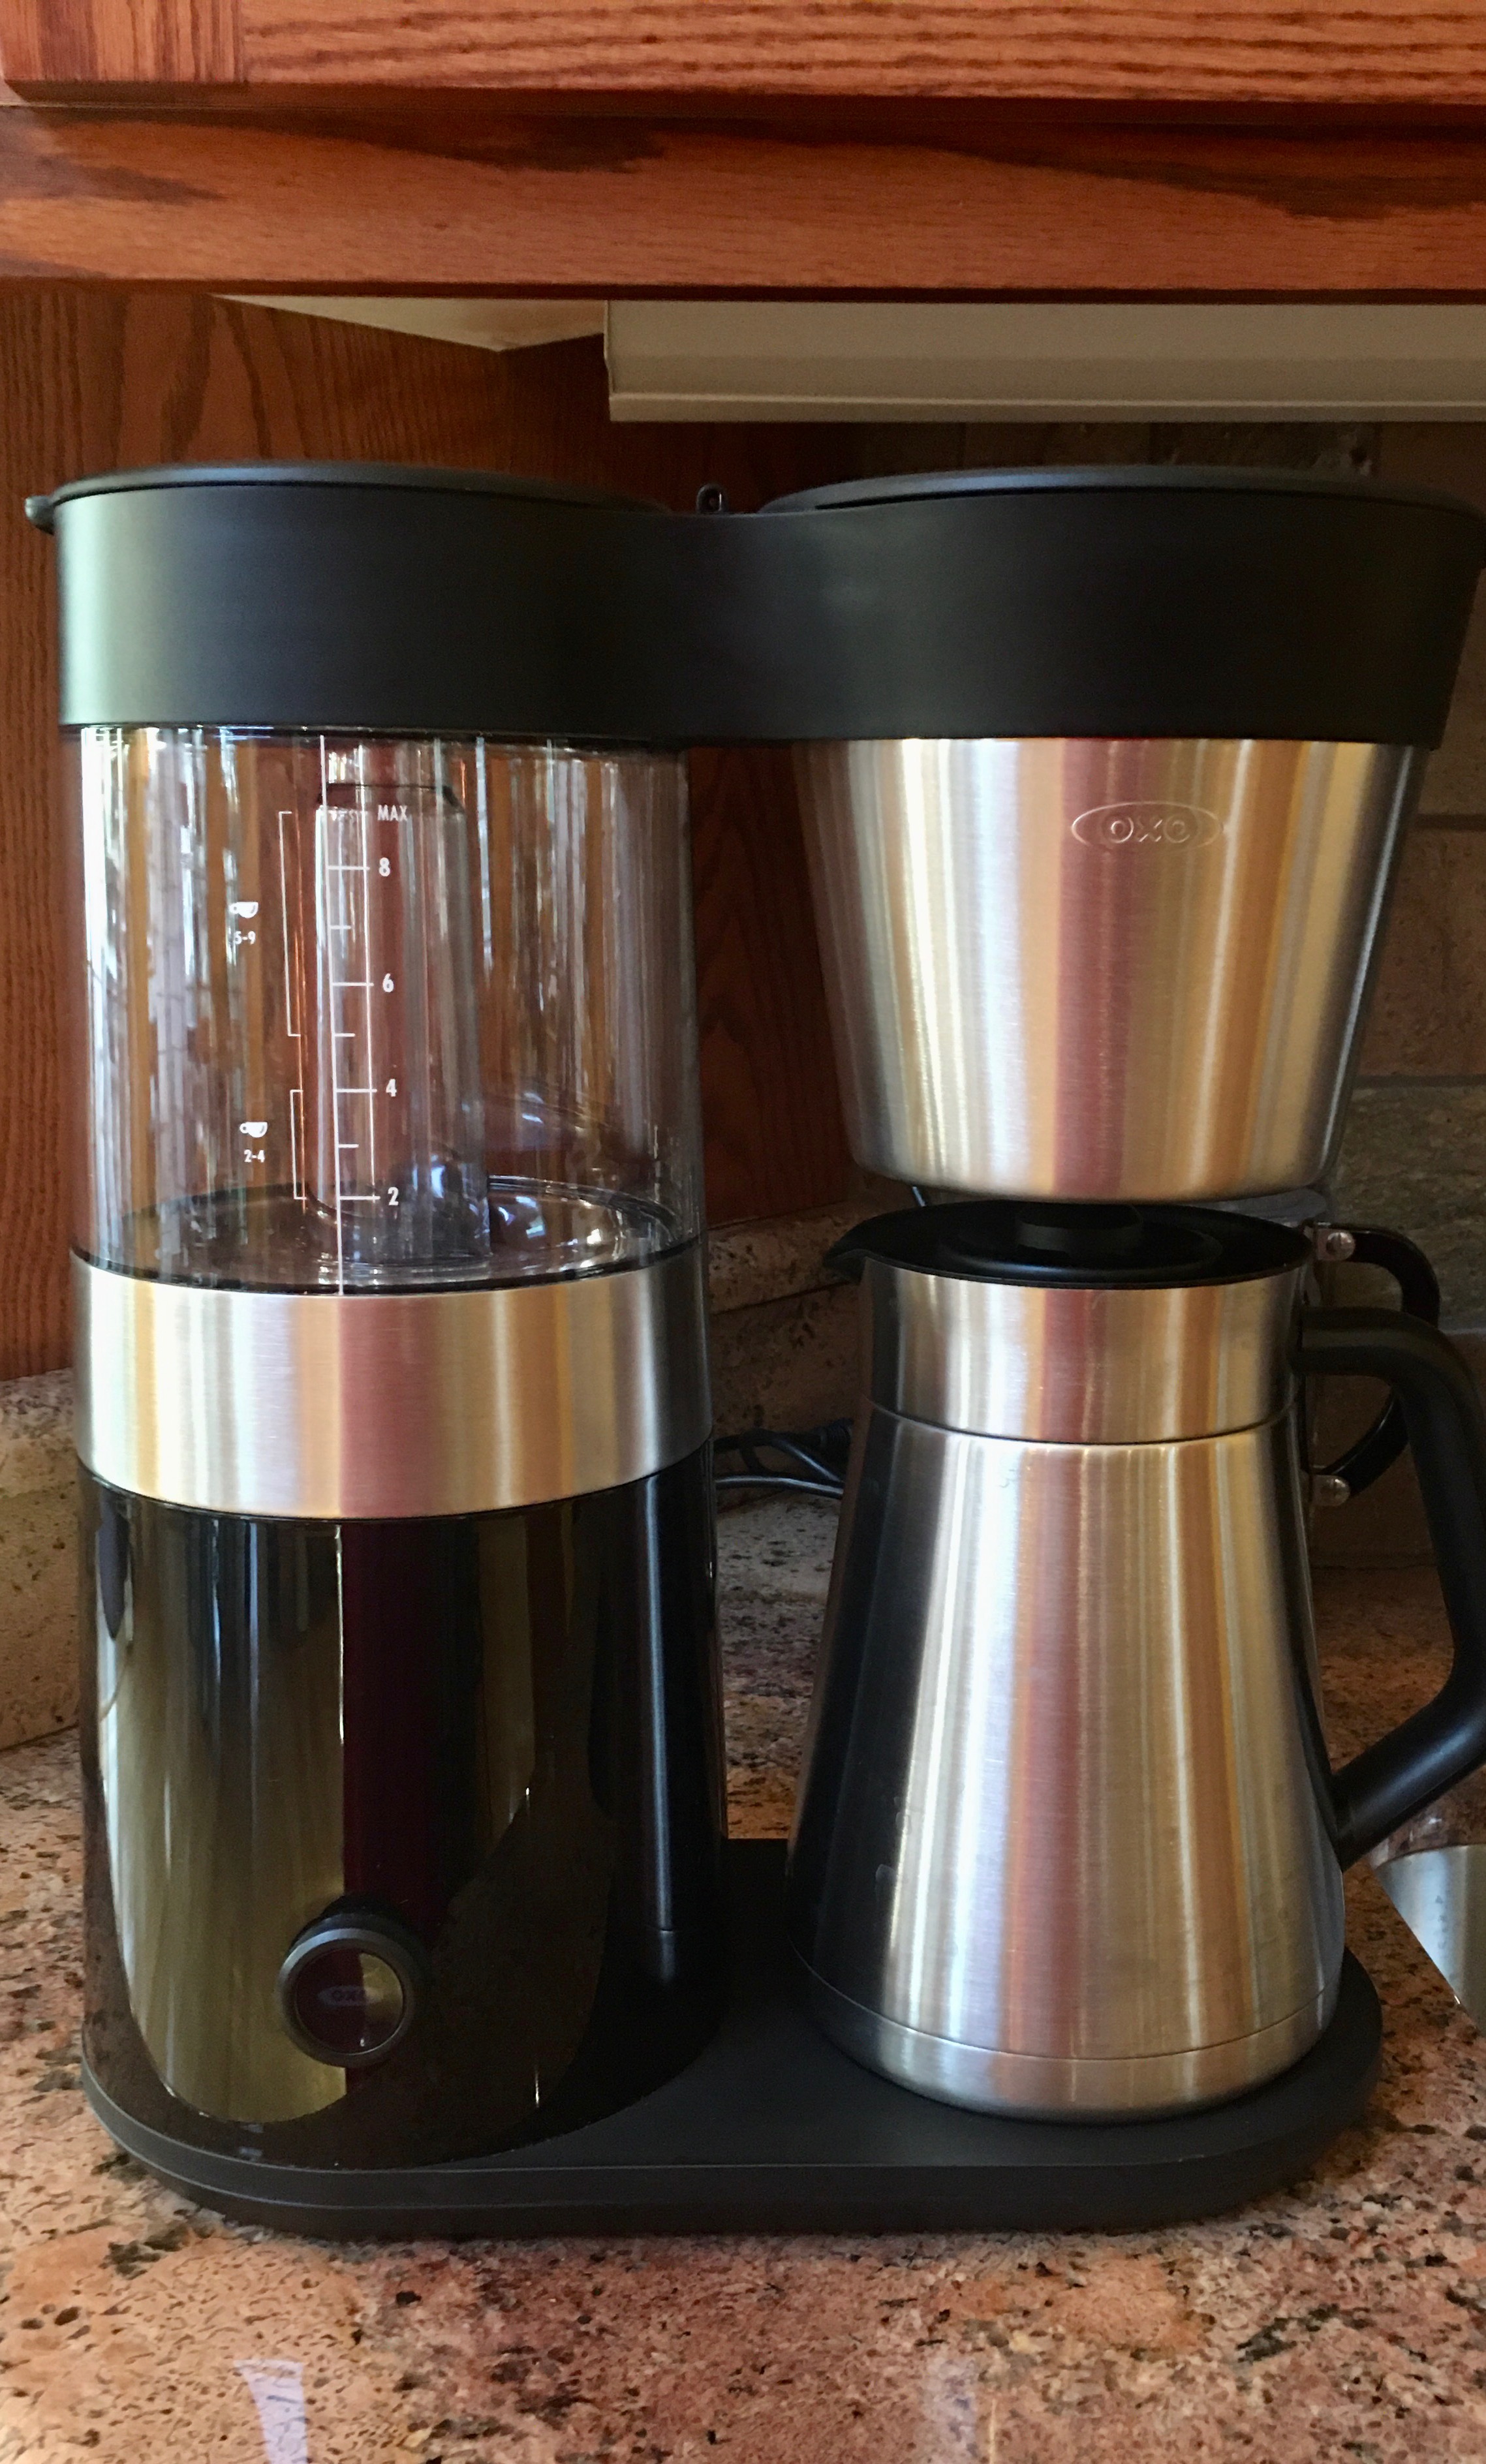 How to Use the OXO Brew 9 Cup Coffee Maker 